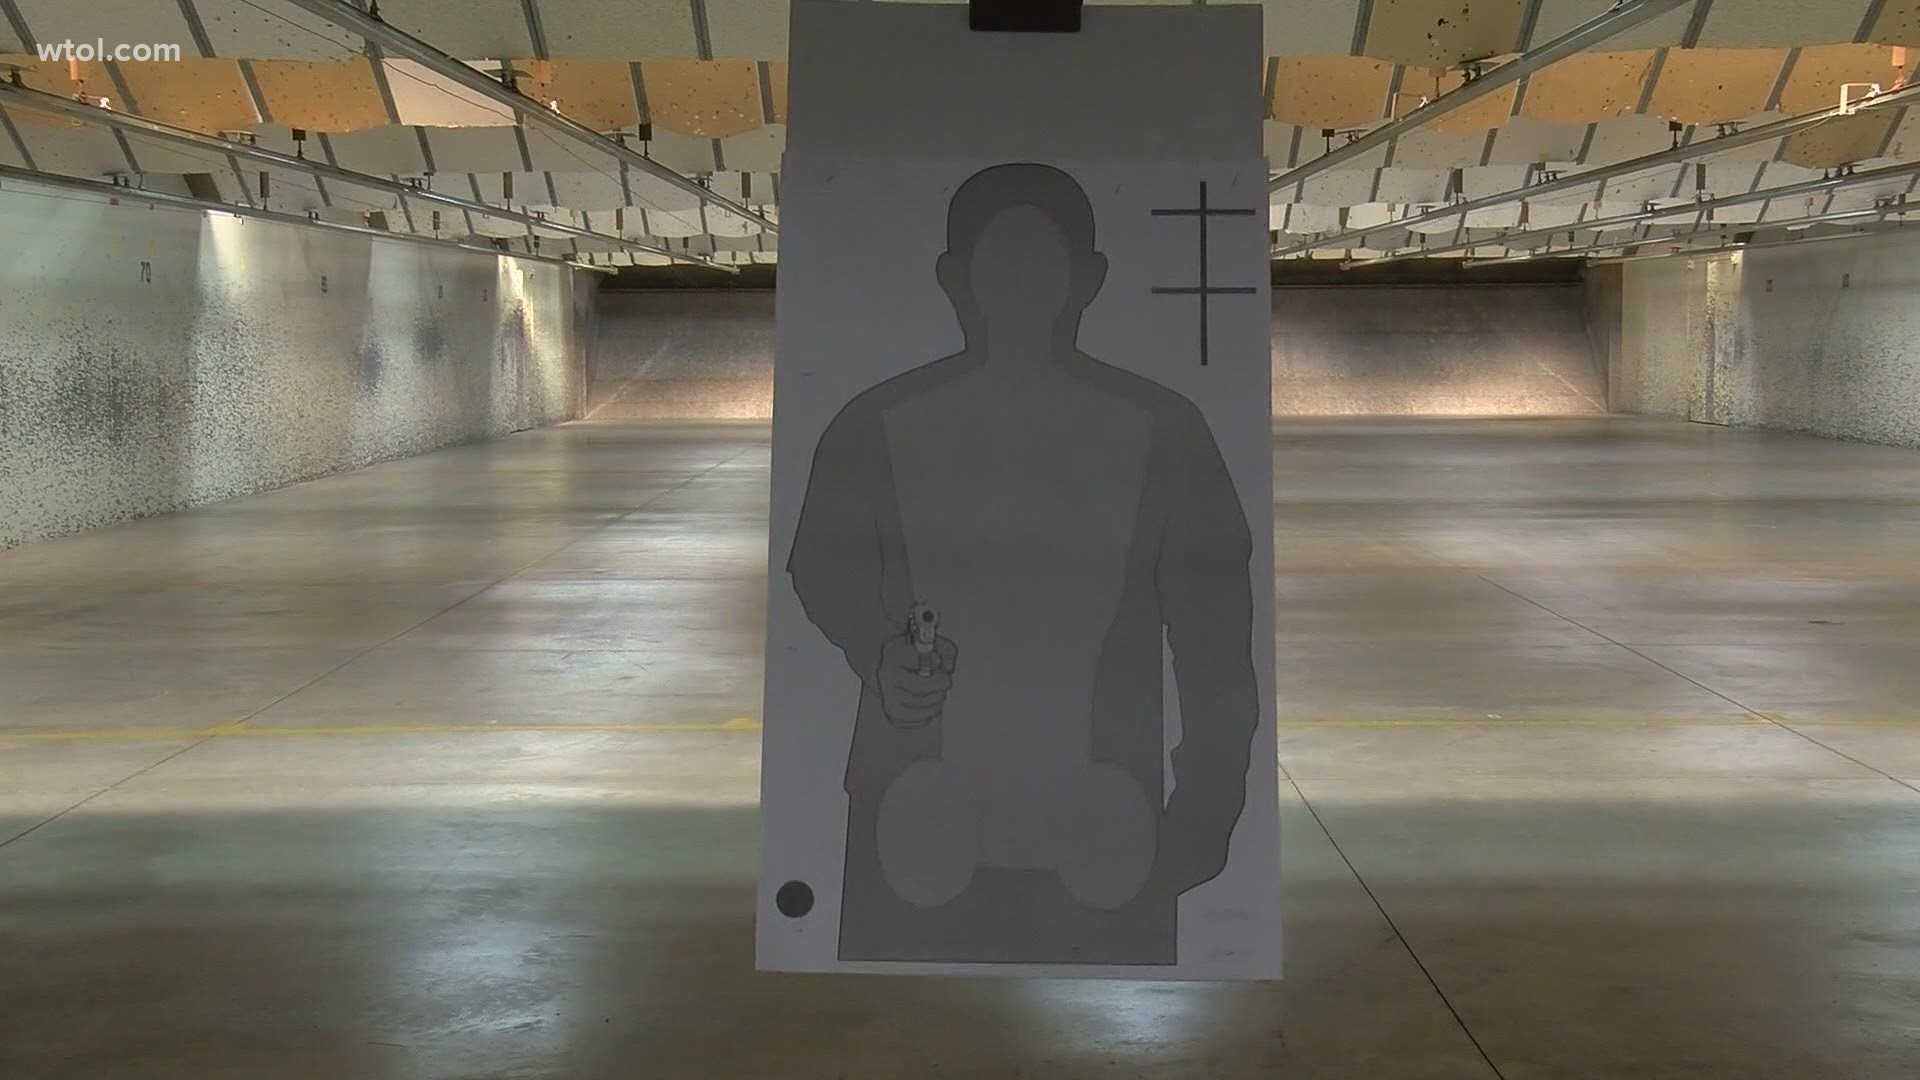 Midwest Shooting Center petitioned Sylvania City Council to rezone the location to allow for an indoor shooting range. A public hearing will be held on Dec. 21.